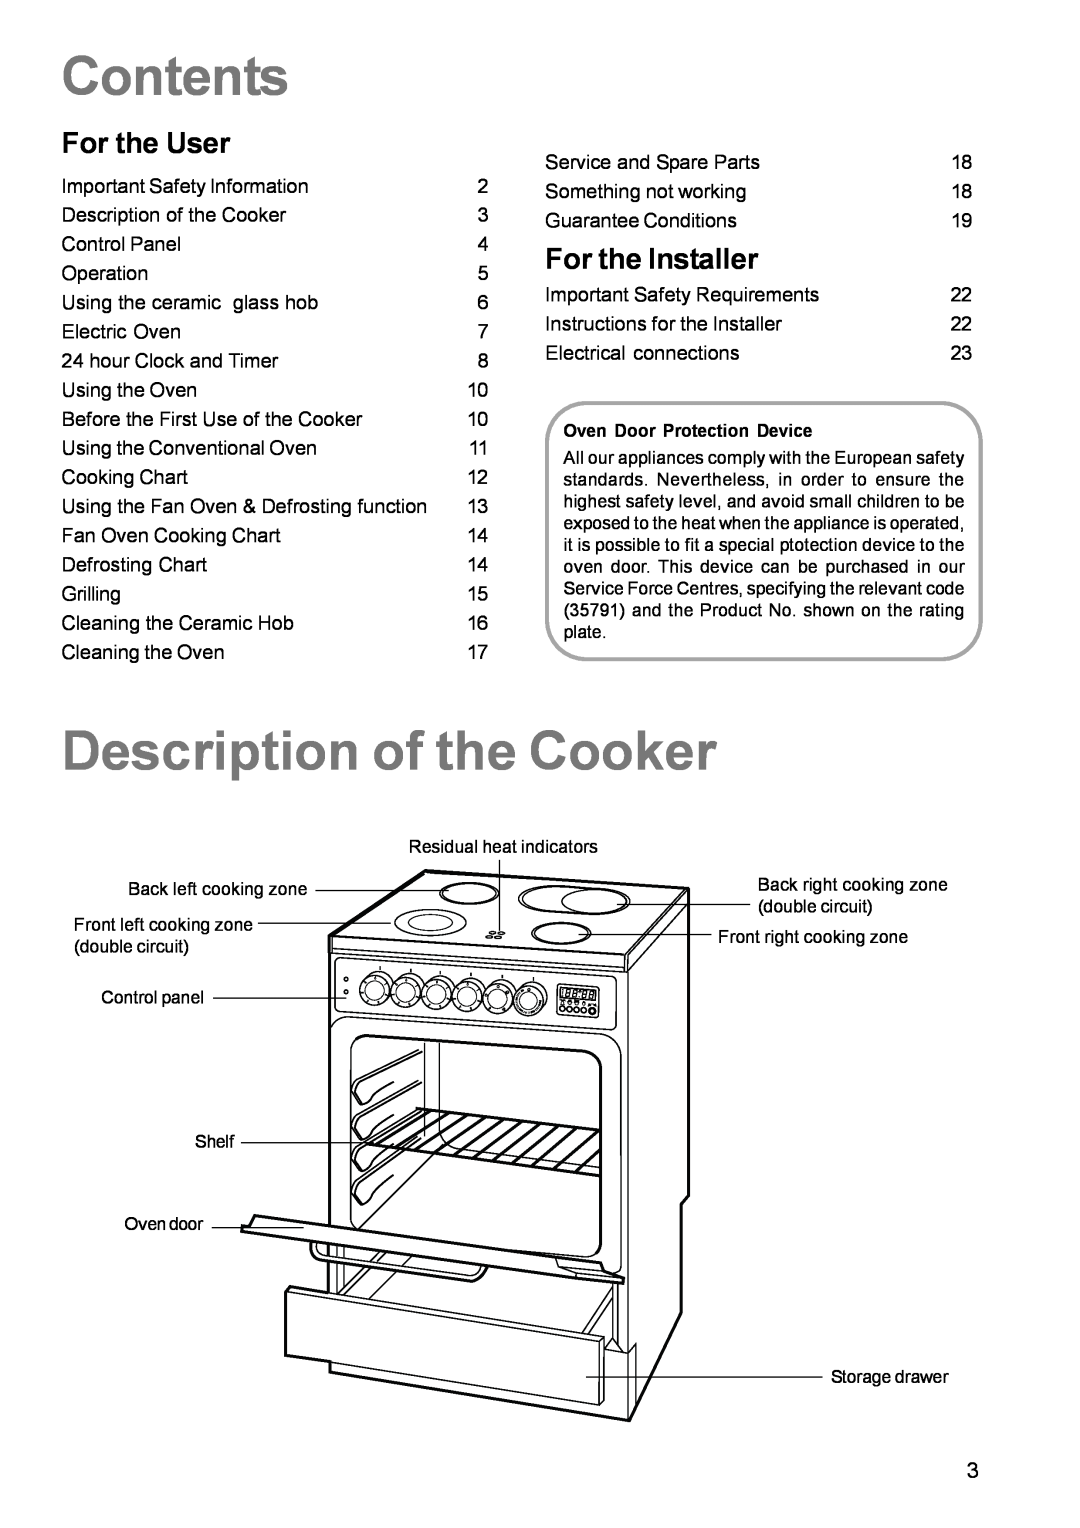 Zanussi ZCE 630 manual Contents, Description of the Cooker, For the User, For the Installer 